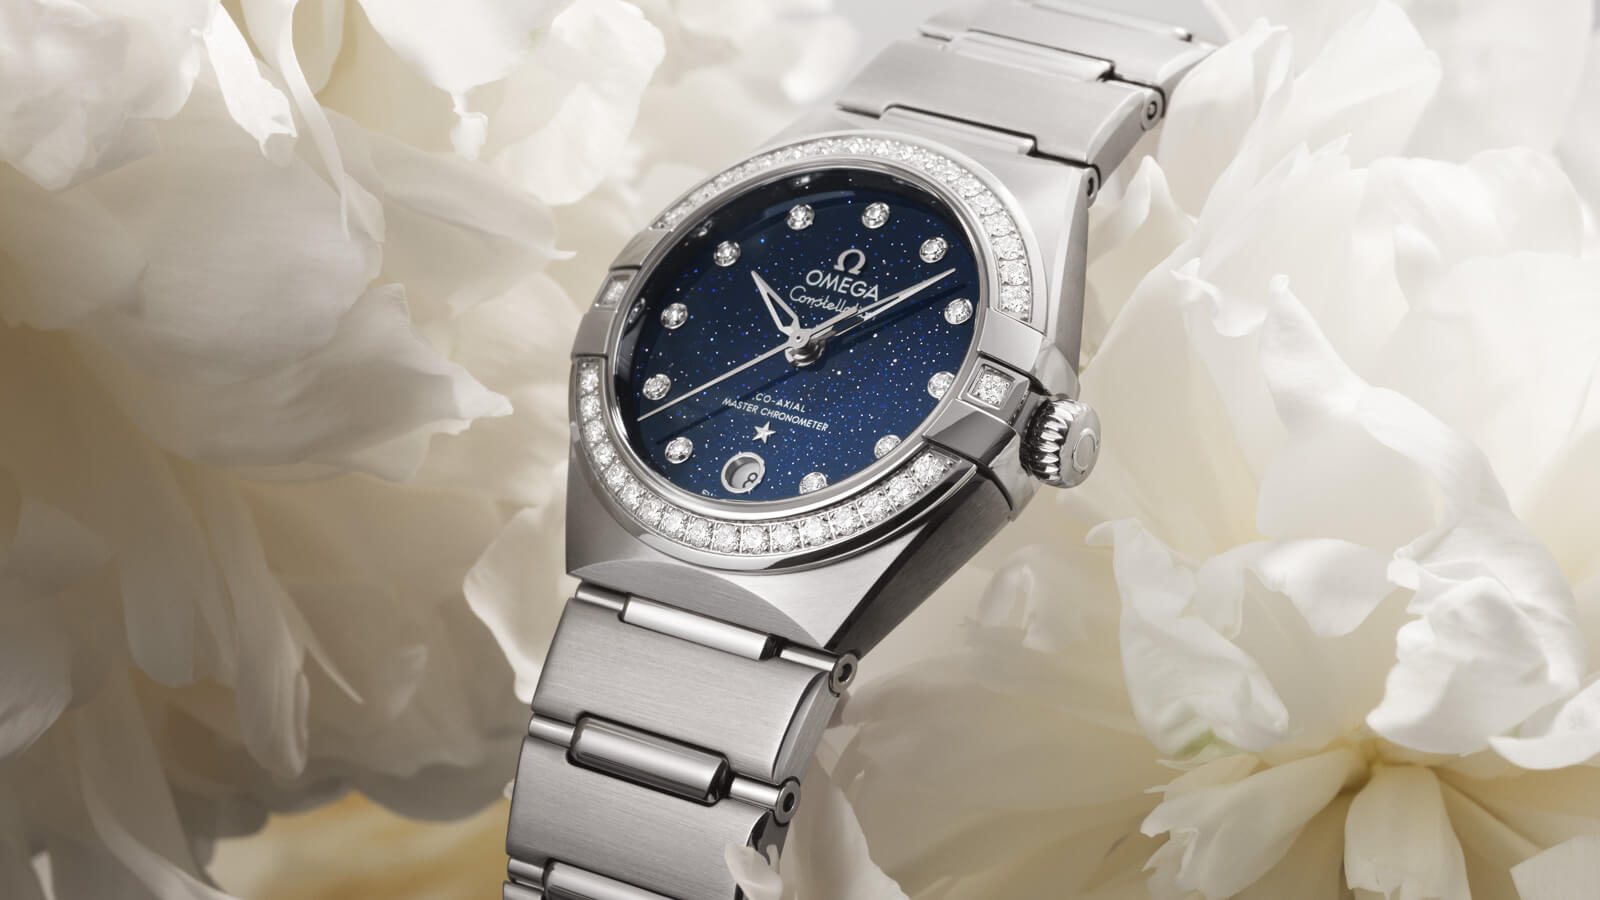 Ladies' watch  OMEGA, Constellation Co Axial Master Chronometer / 29mm, SKU: 131.15.29.20.53.001 | watchapproach.com